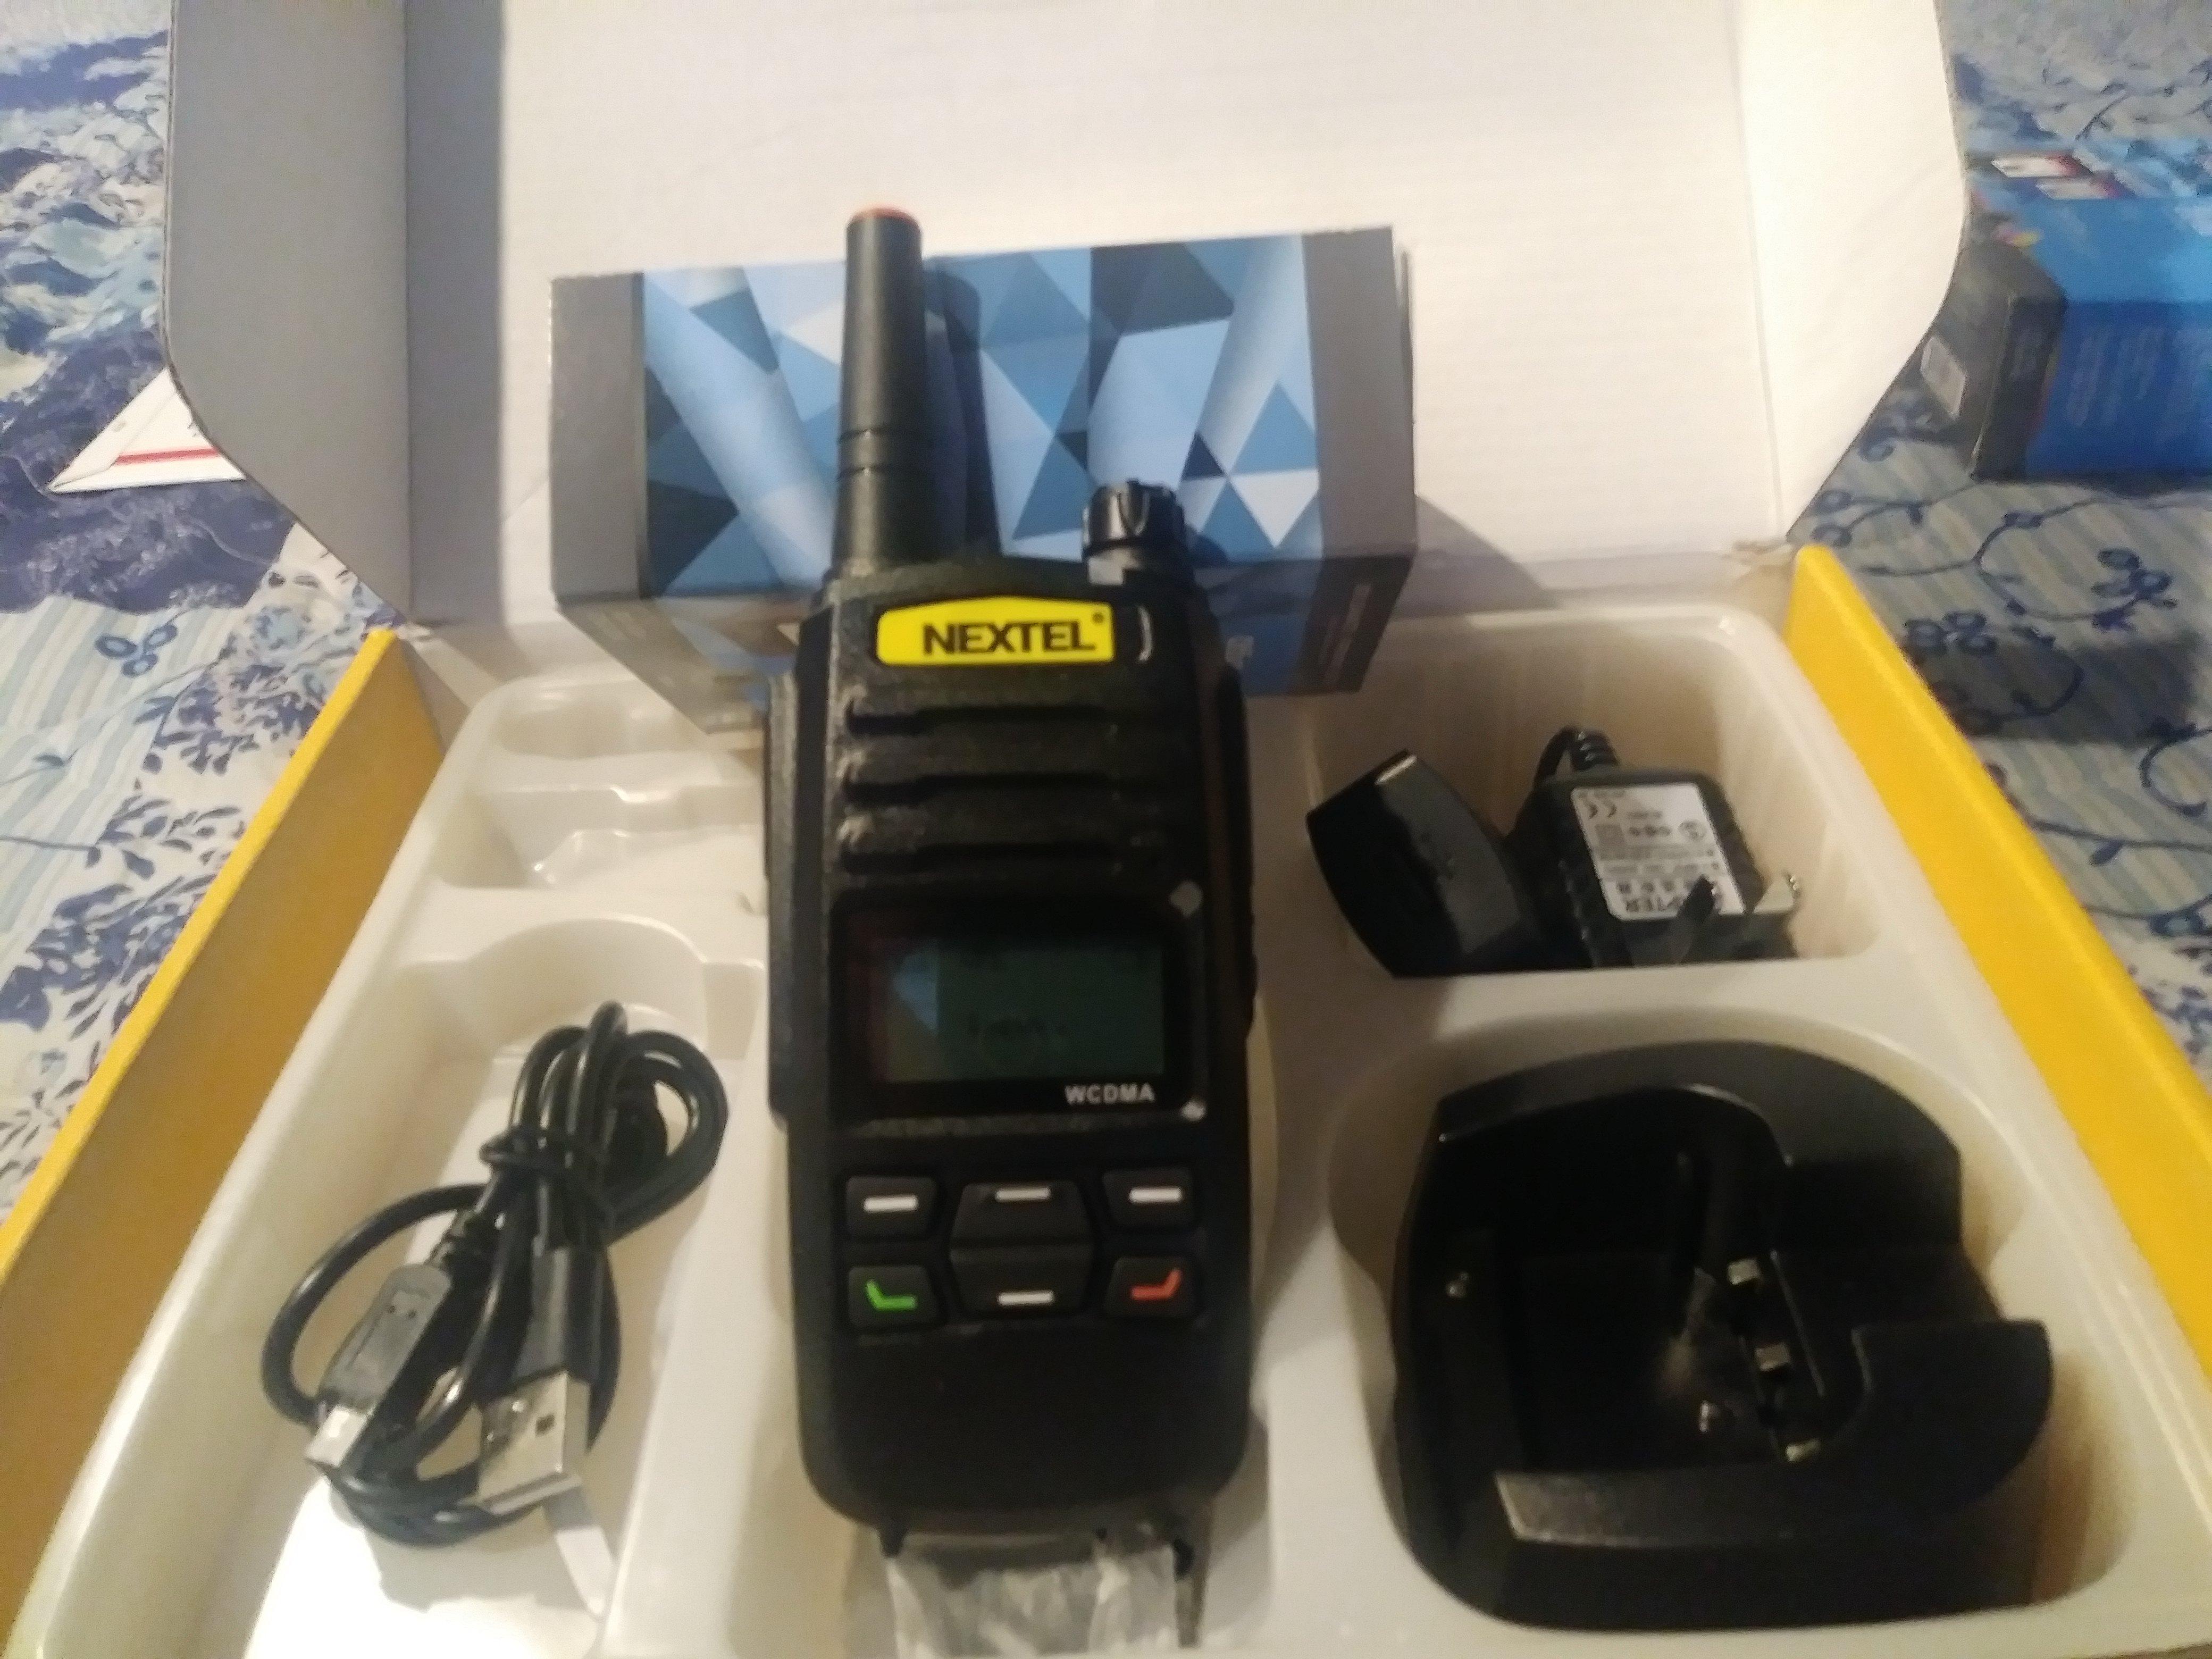 NEXTEL 2018 walkie talkie in box with charger.